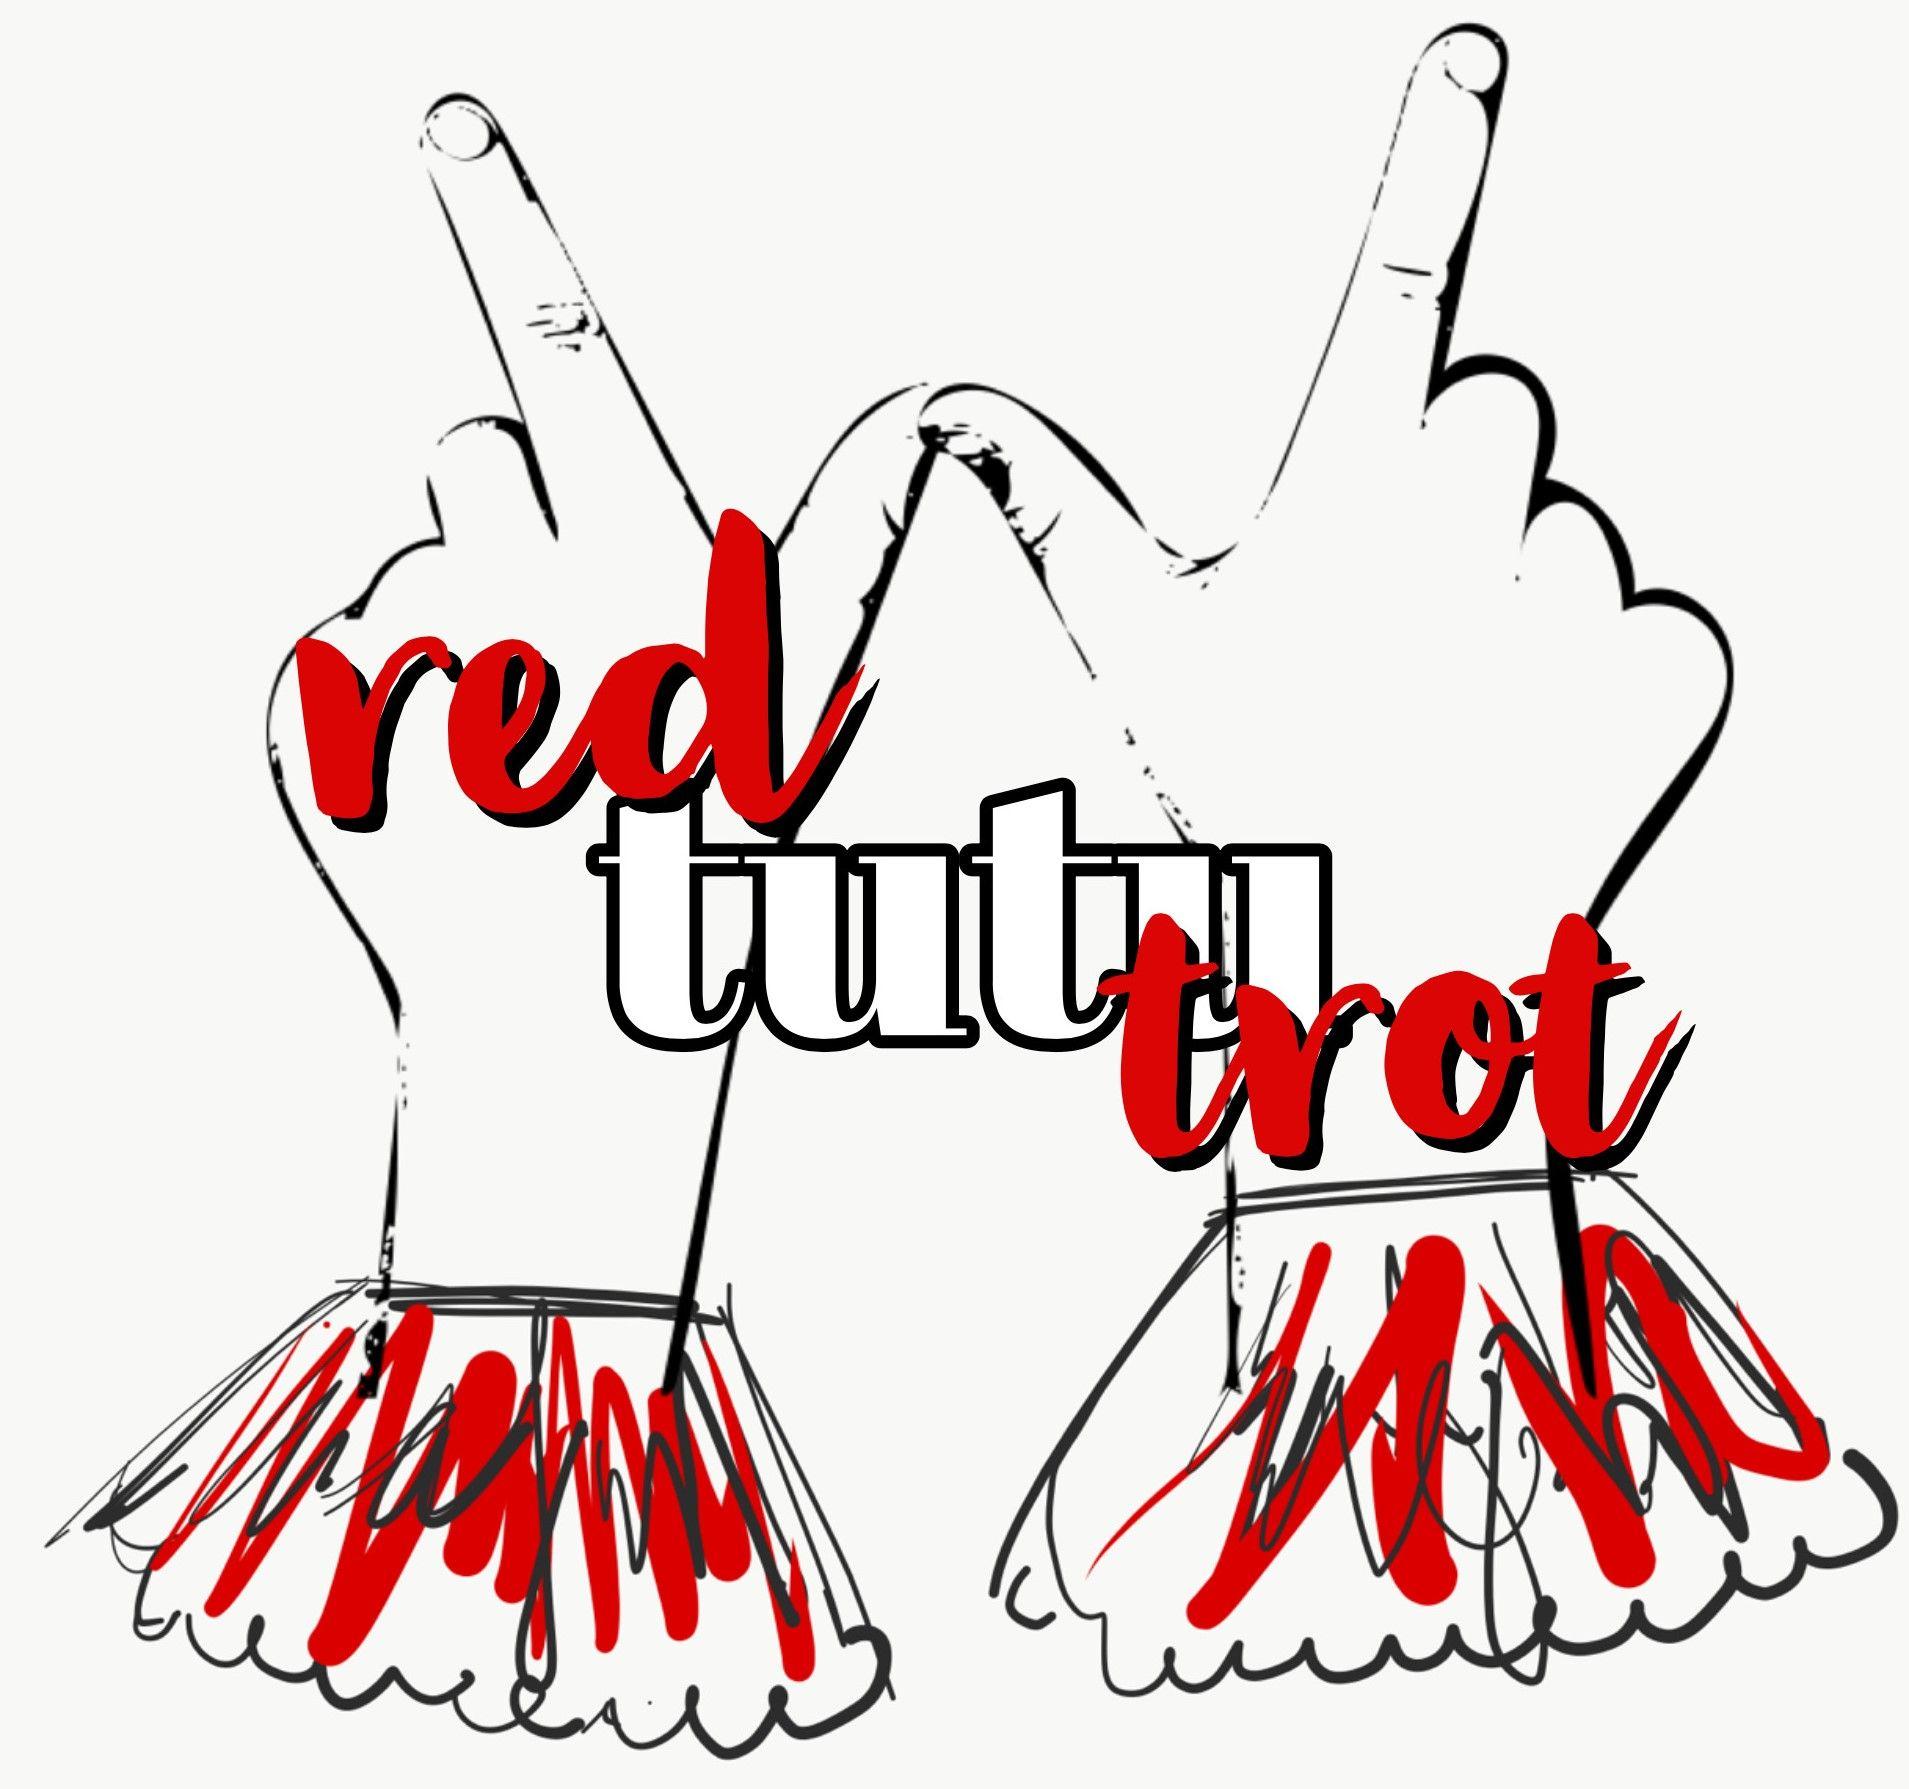 Silver On a Red Hand Logo - Red Tutu Trot. Silver Circle Sports Events